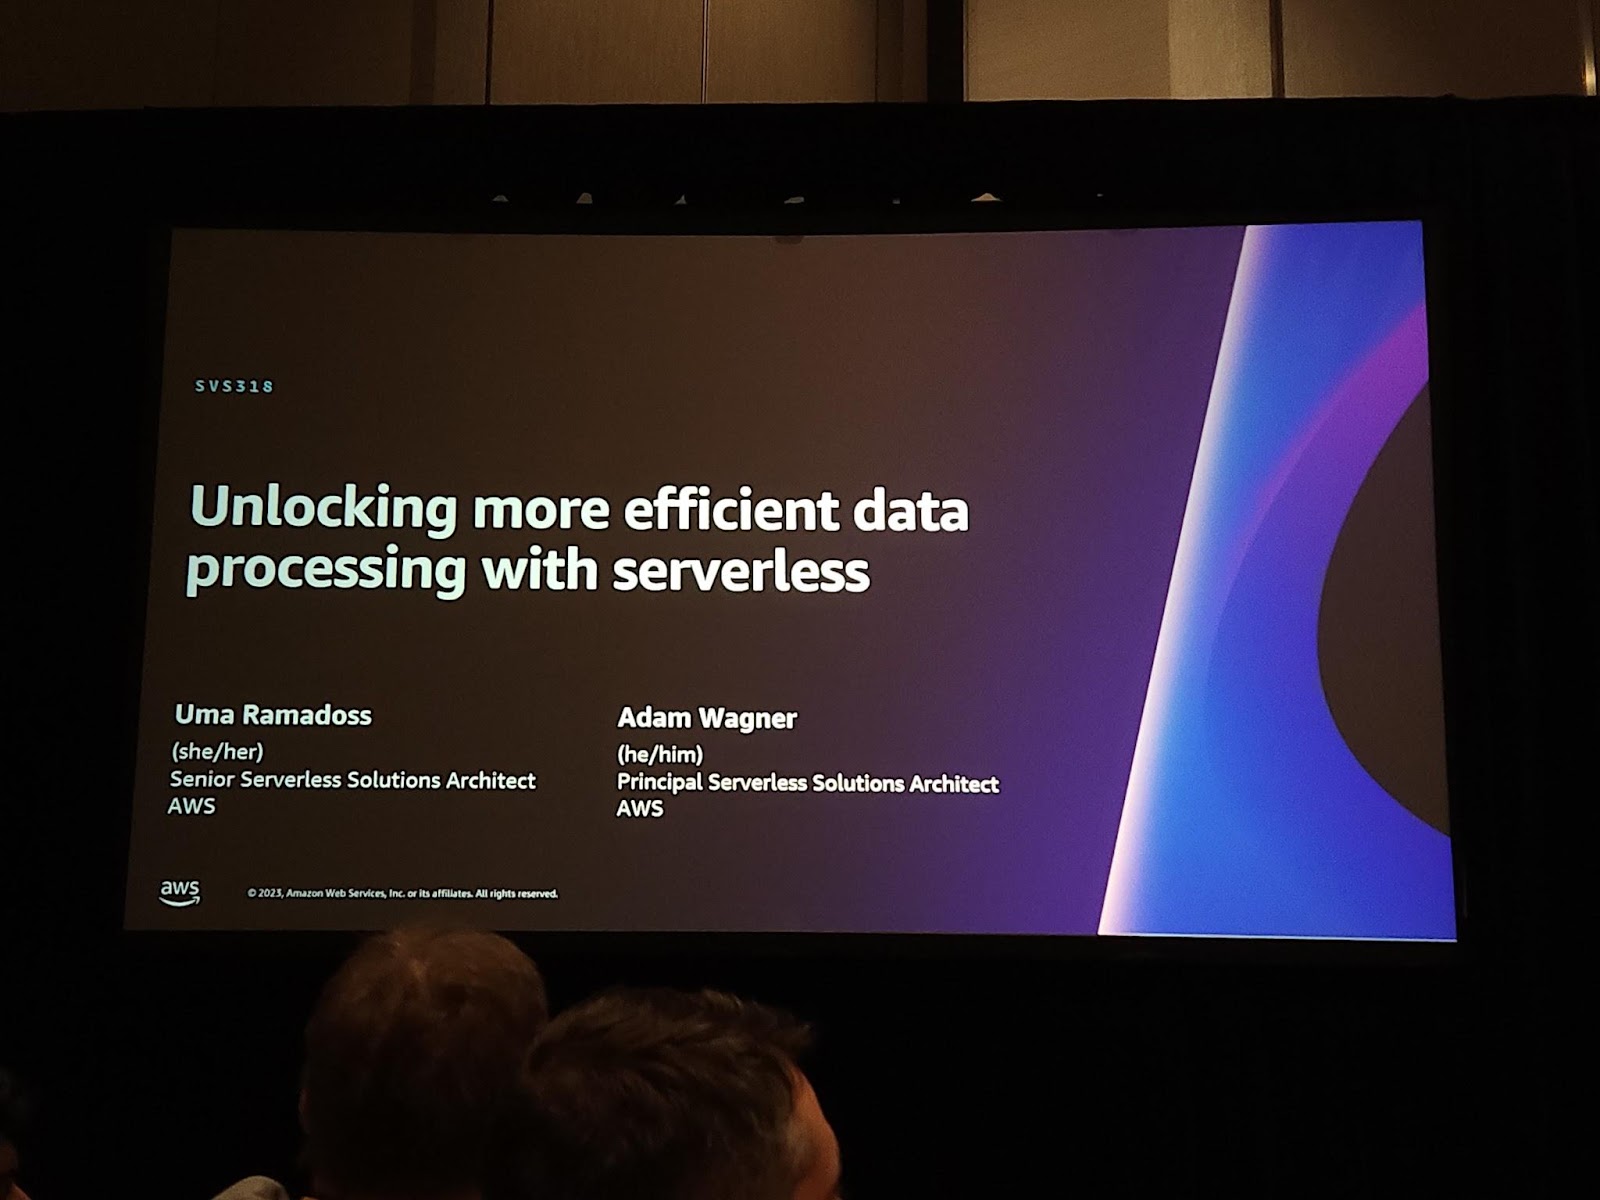 Unlocking more efficient data processing with serverless